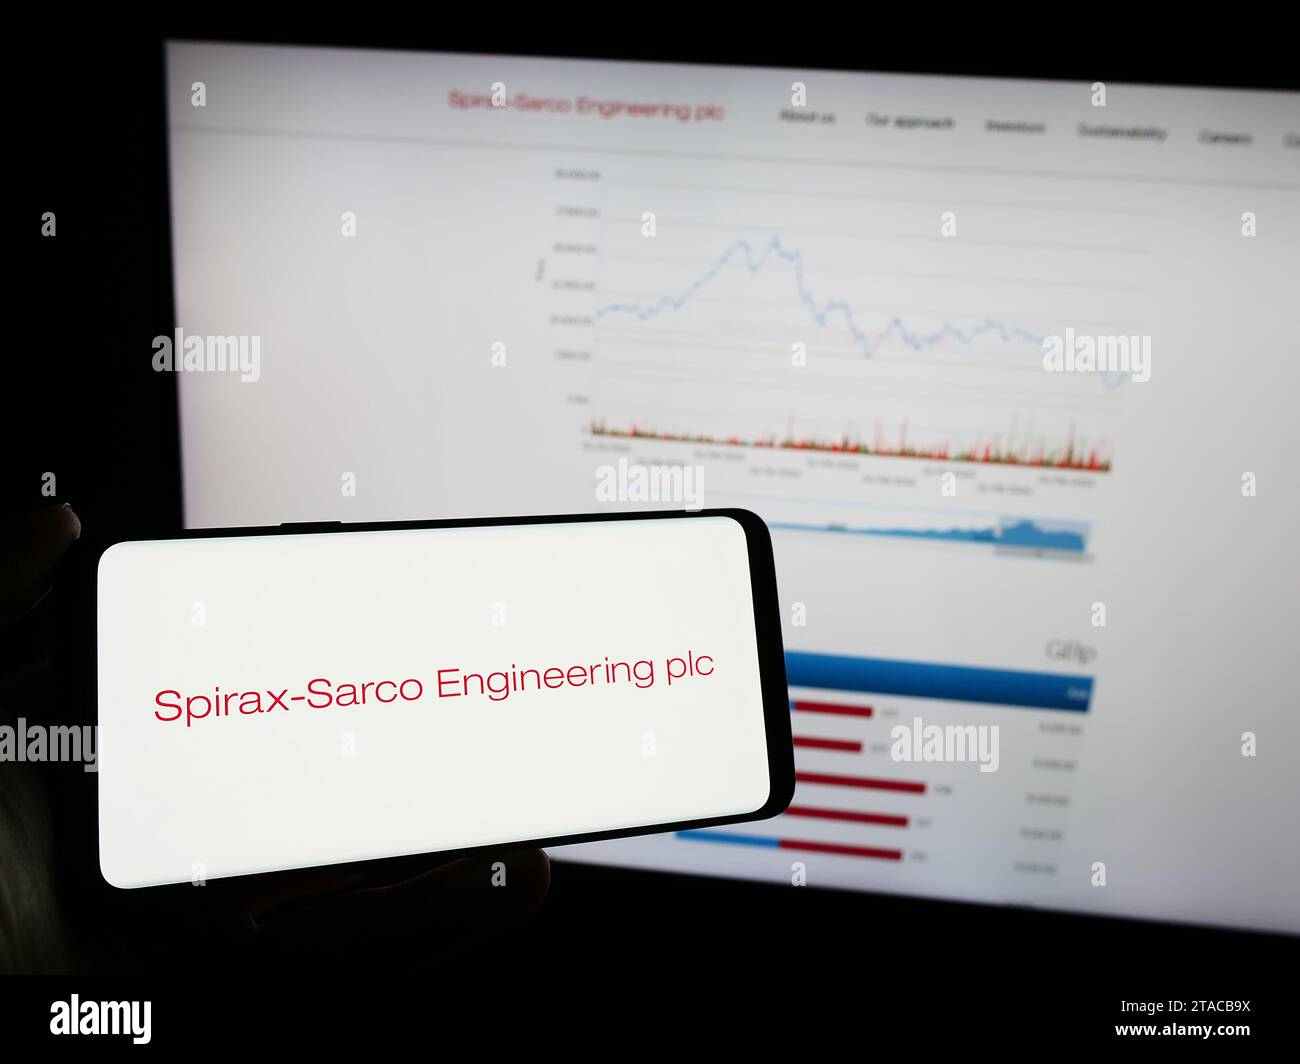 Person holding mobile phone with logo of British company Spirax-Sarco Engineering plc in front of business web page. Focus on phone display. Stock Photo